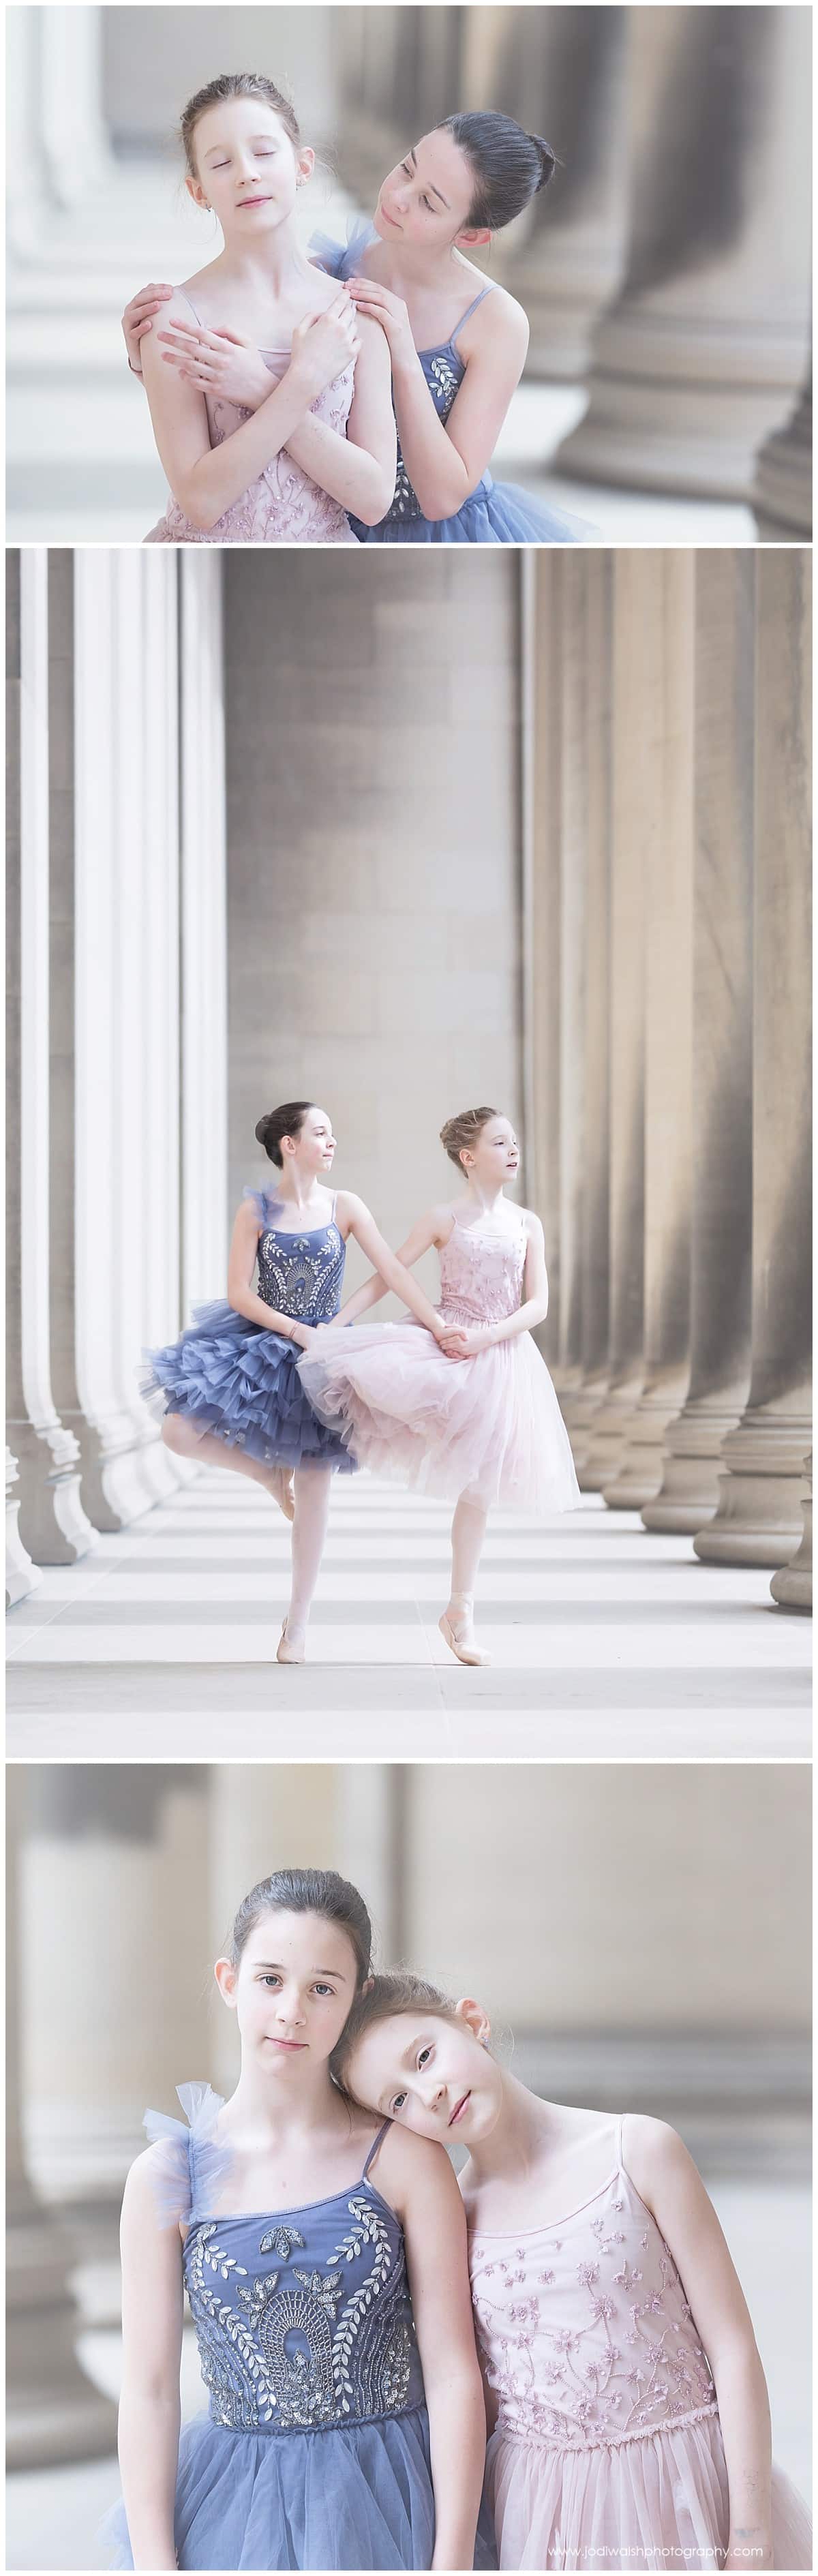 Images from creative dance portraits with Jodi Walsh Photography. this collage of images show two tween ballerinas in tutu dresses dancing in stone hallway in Pittsburgh